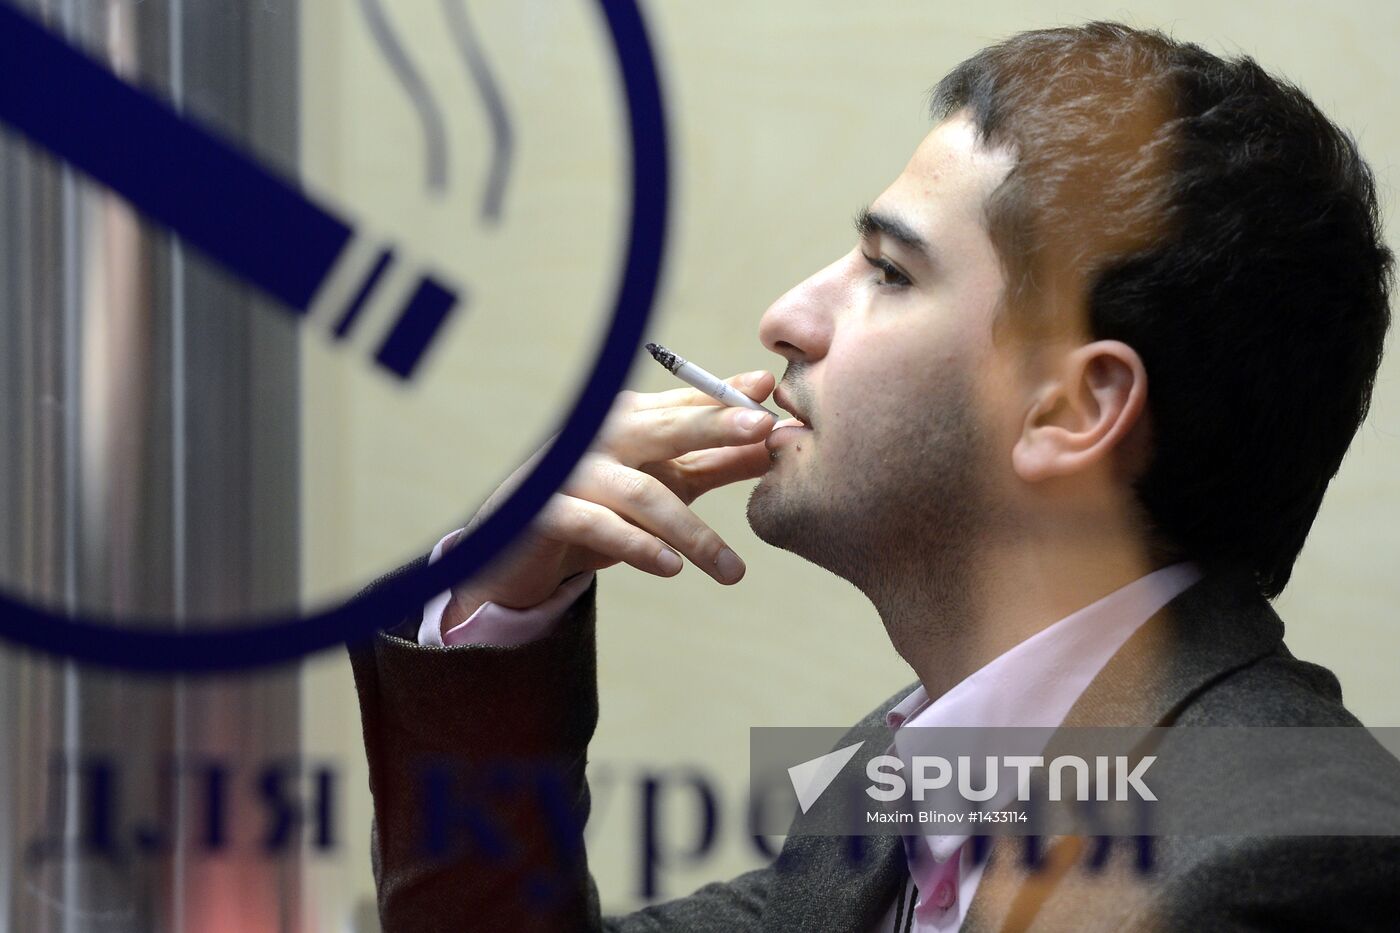 Smoking room up to Russian Health Ministry's standards